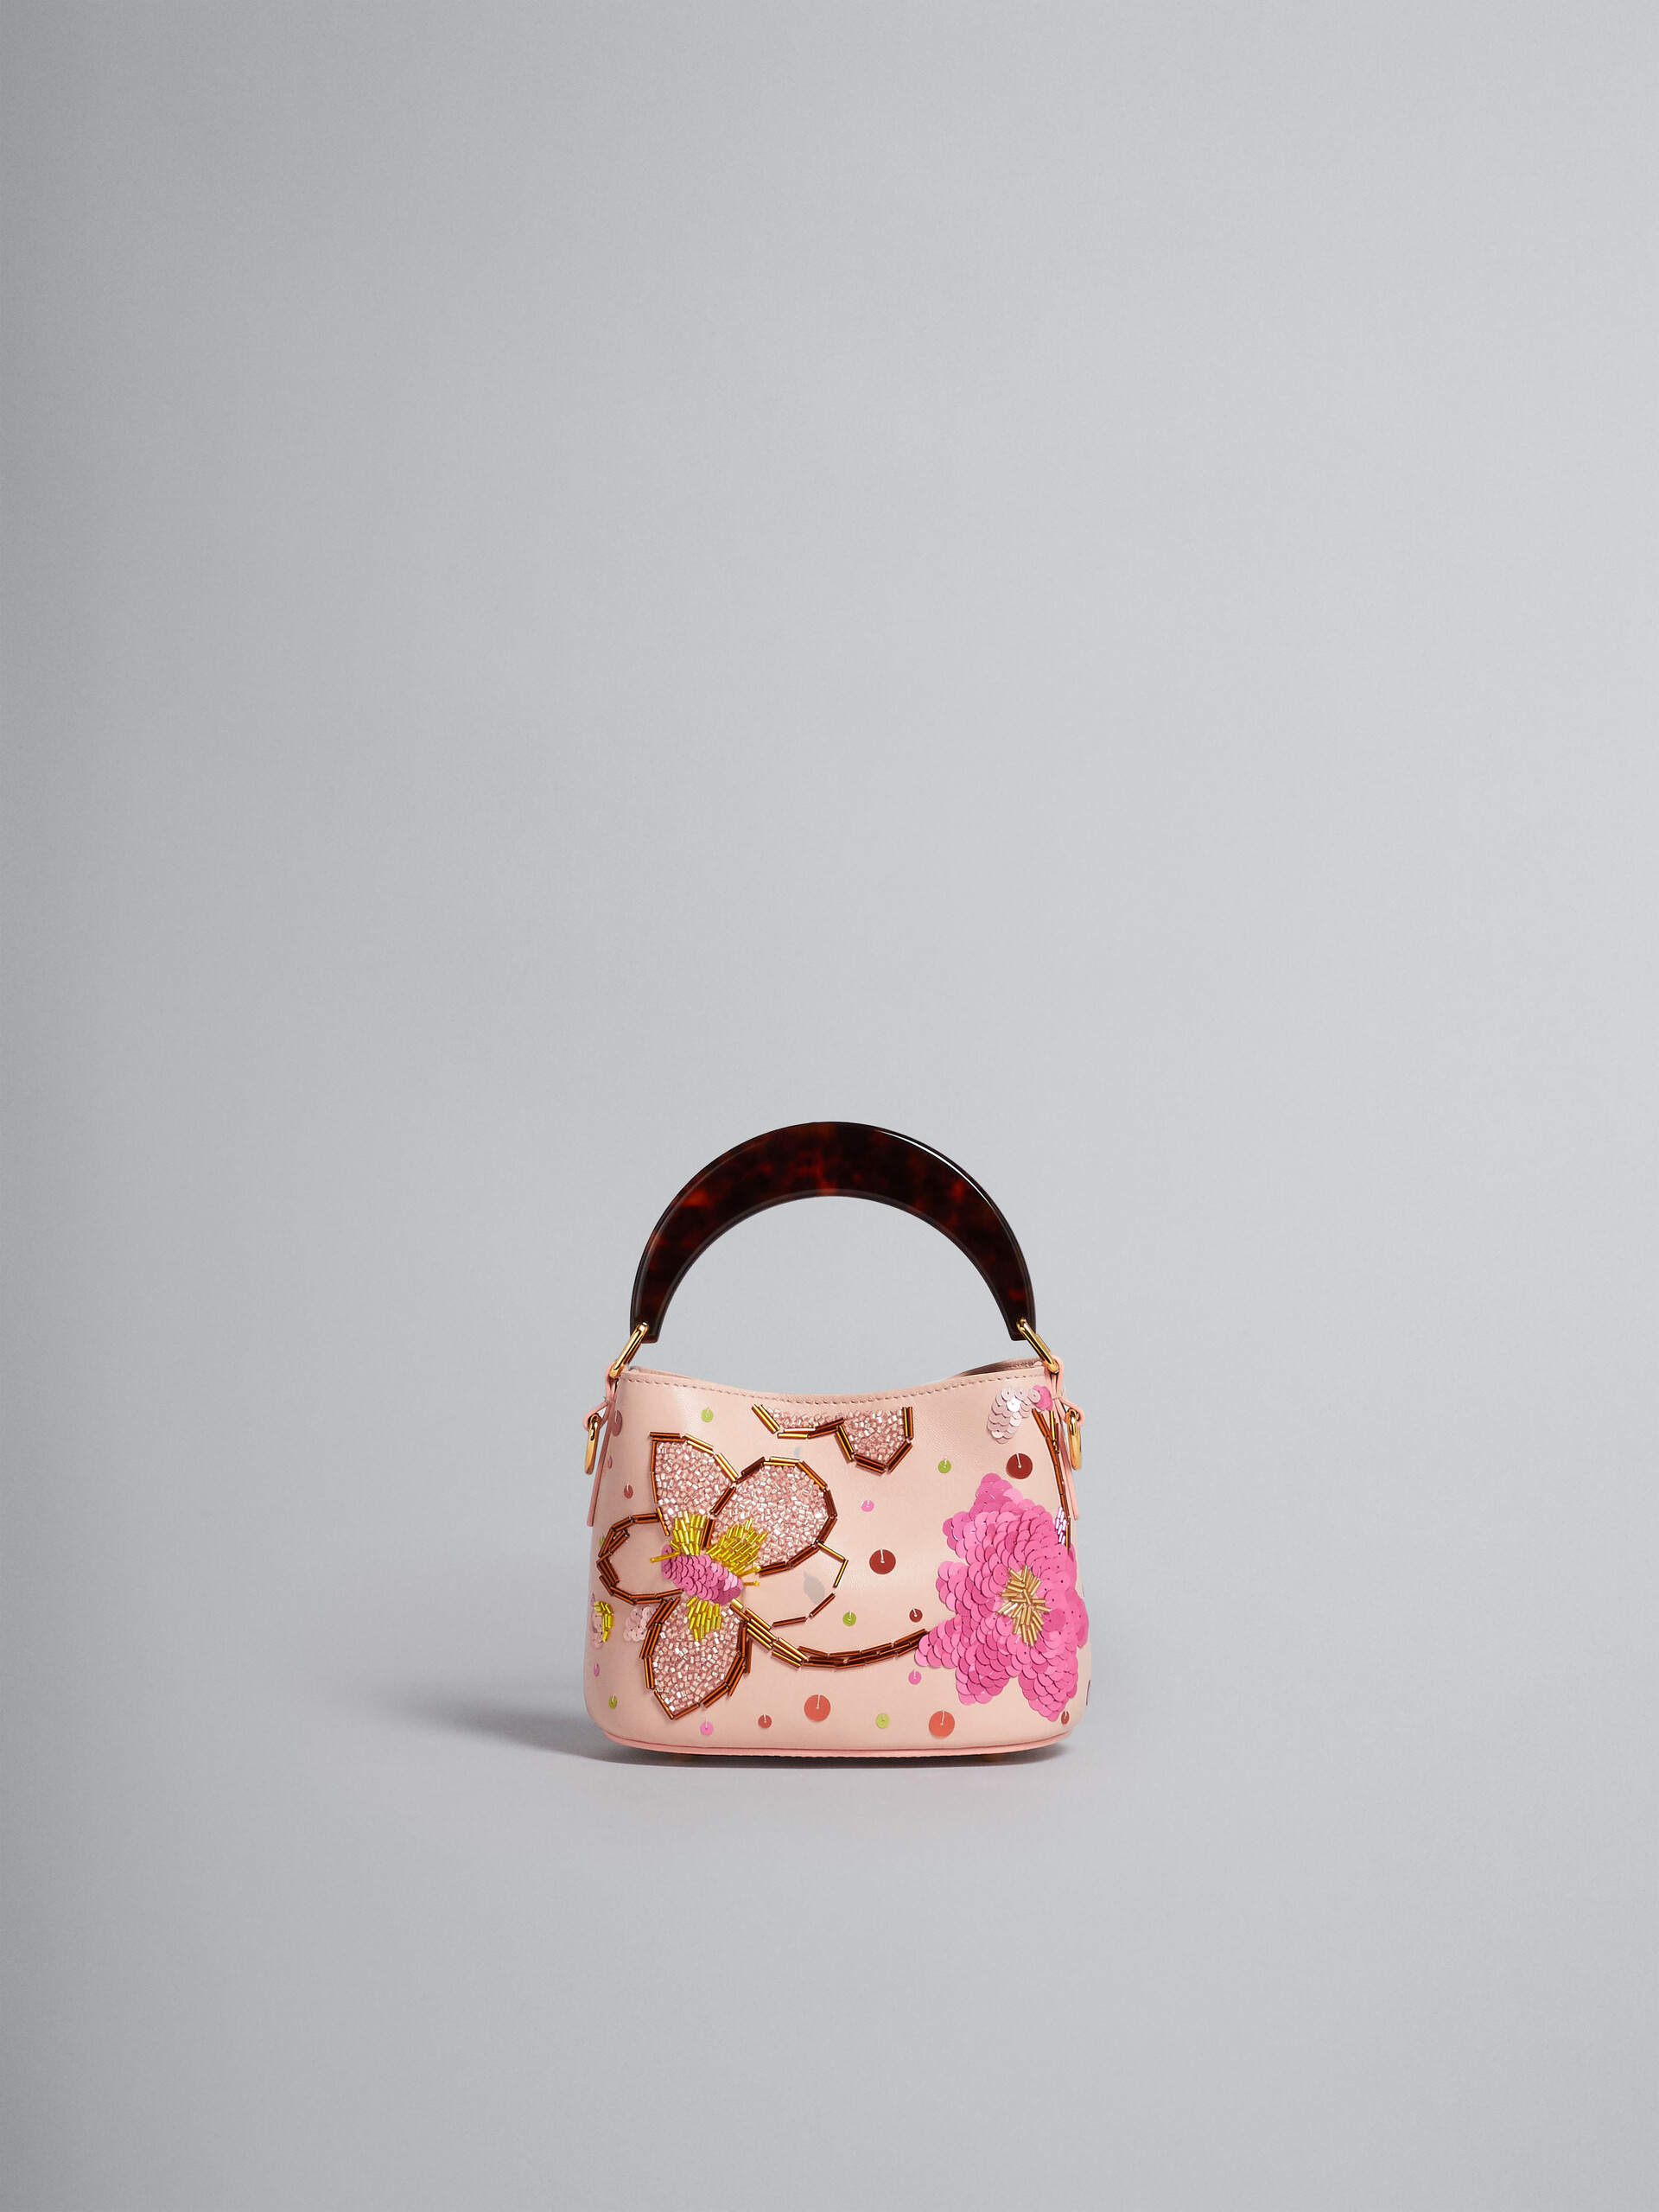 Venice Mini Bucket in embroidered pink leather - Shoulder Bag - Image 1